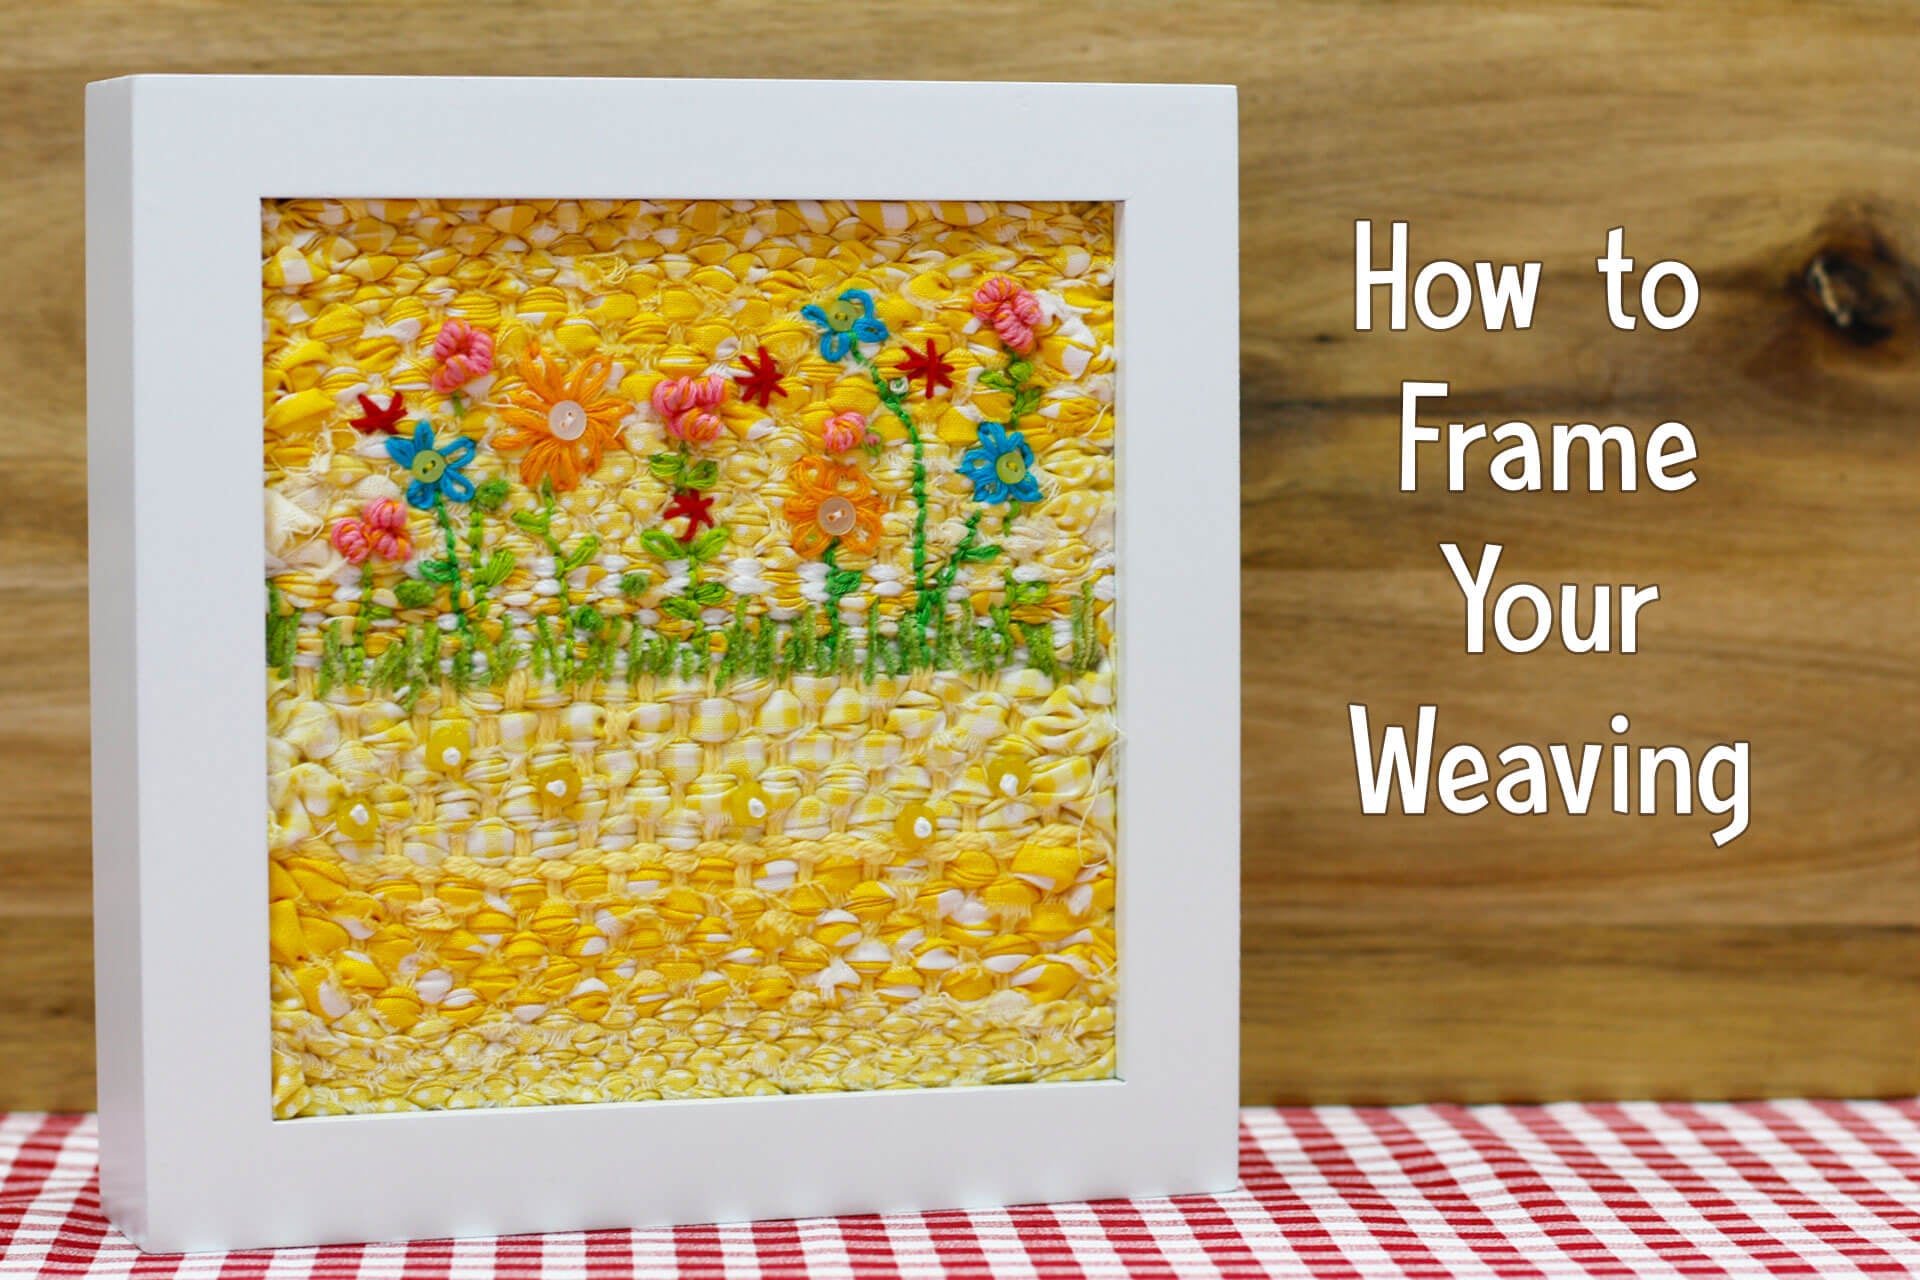 How to Frame Your Weaving